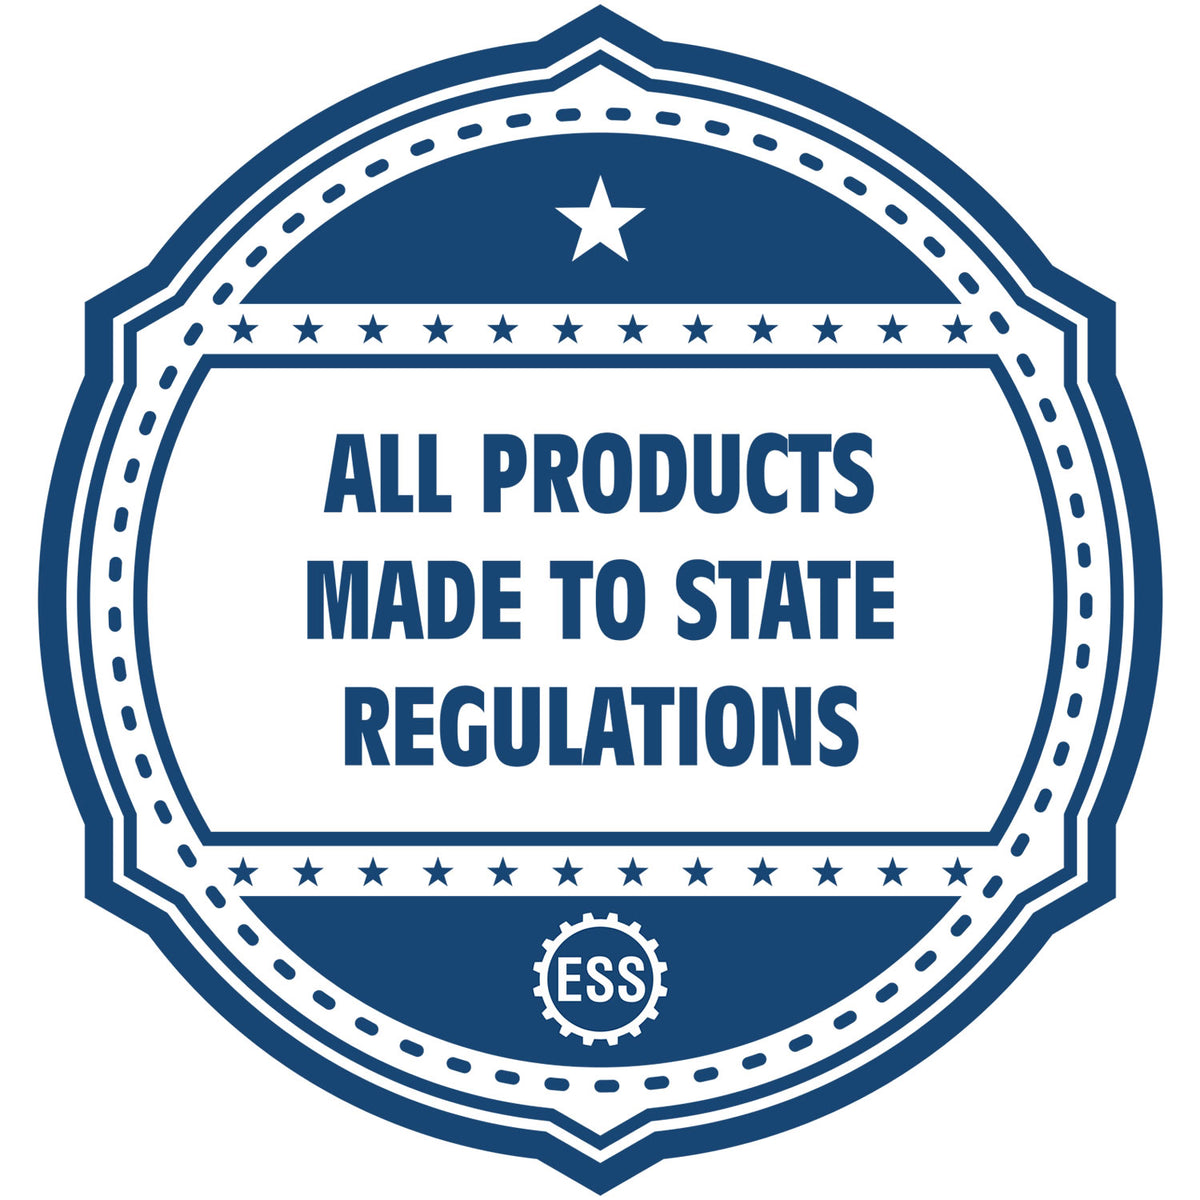 An icon or badge element for the Slim Pre-Inked State Seal Notary Stamp for Ohio showing that this product is made in compliance with state regulations.